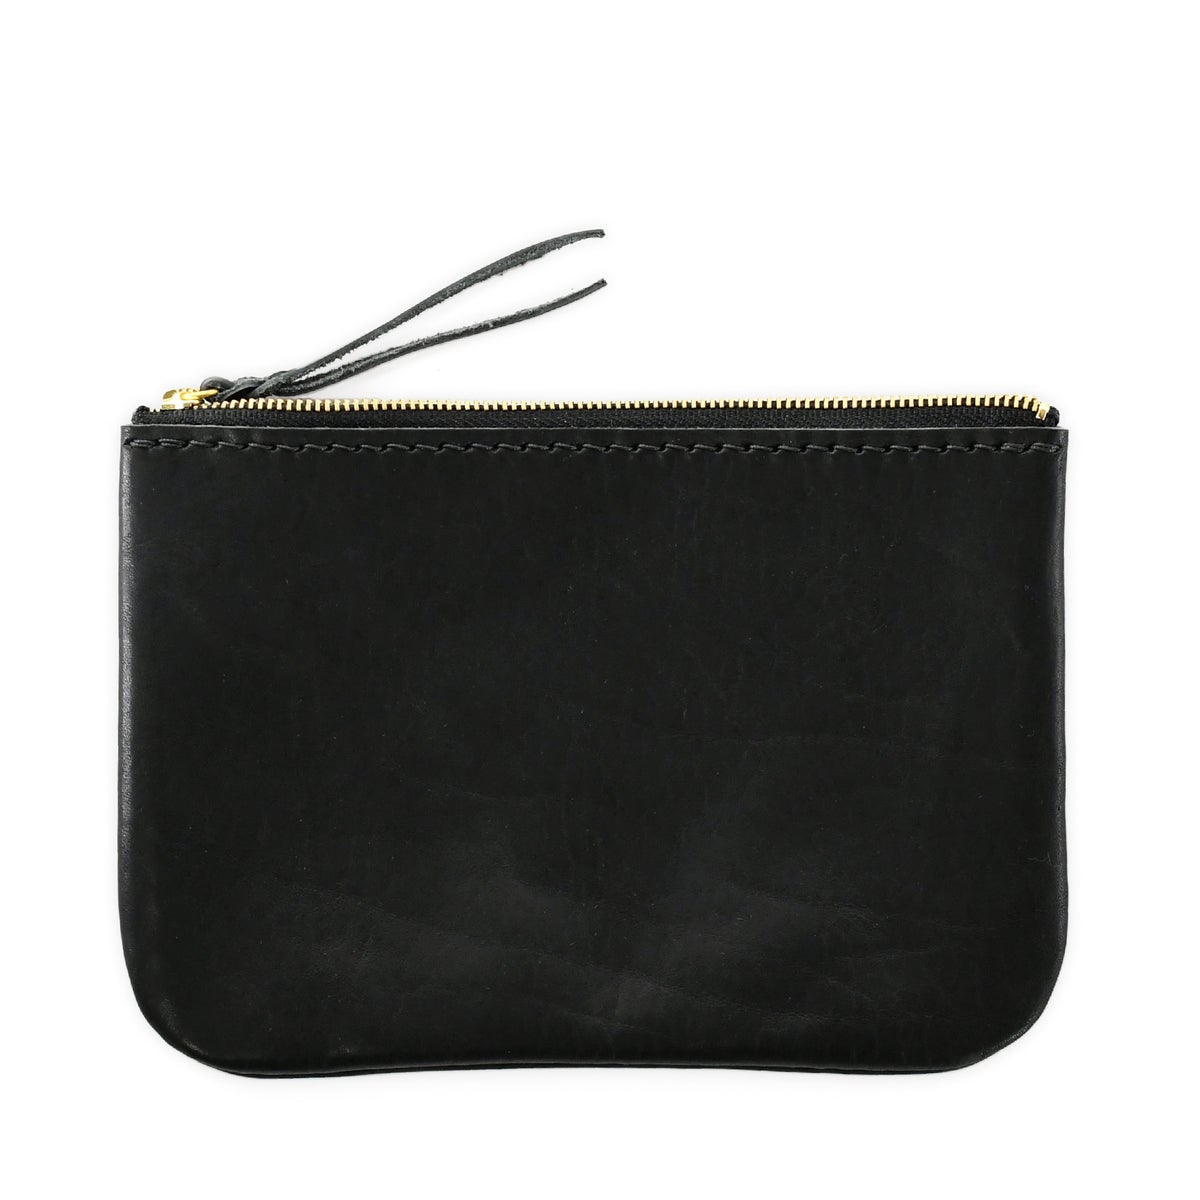 SUPPLIED WEST - LARGE POUCH - BLACK